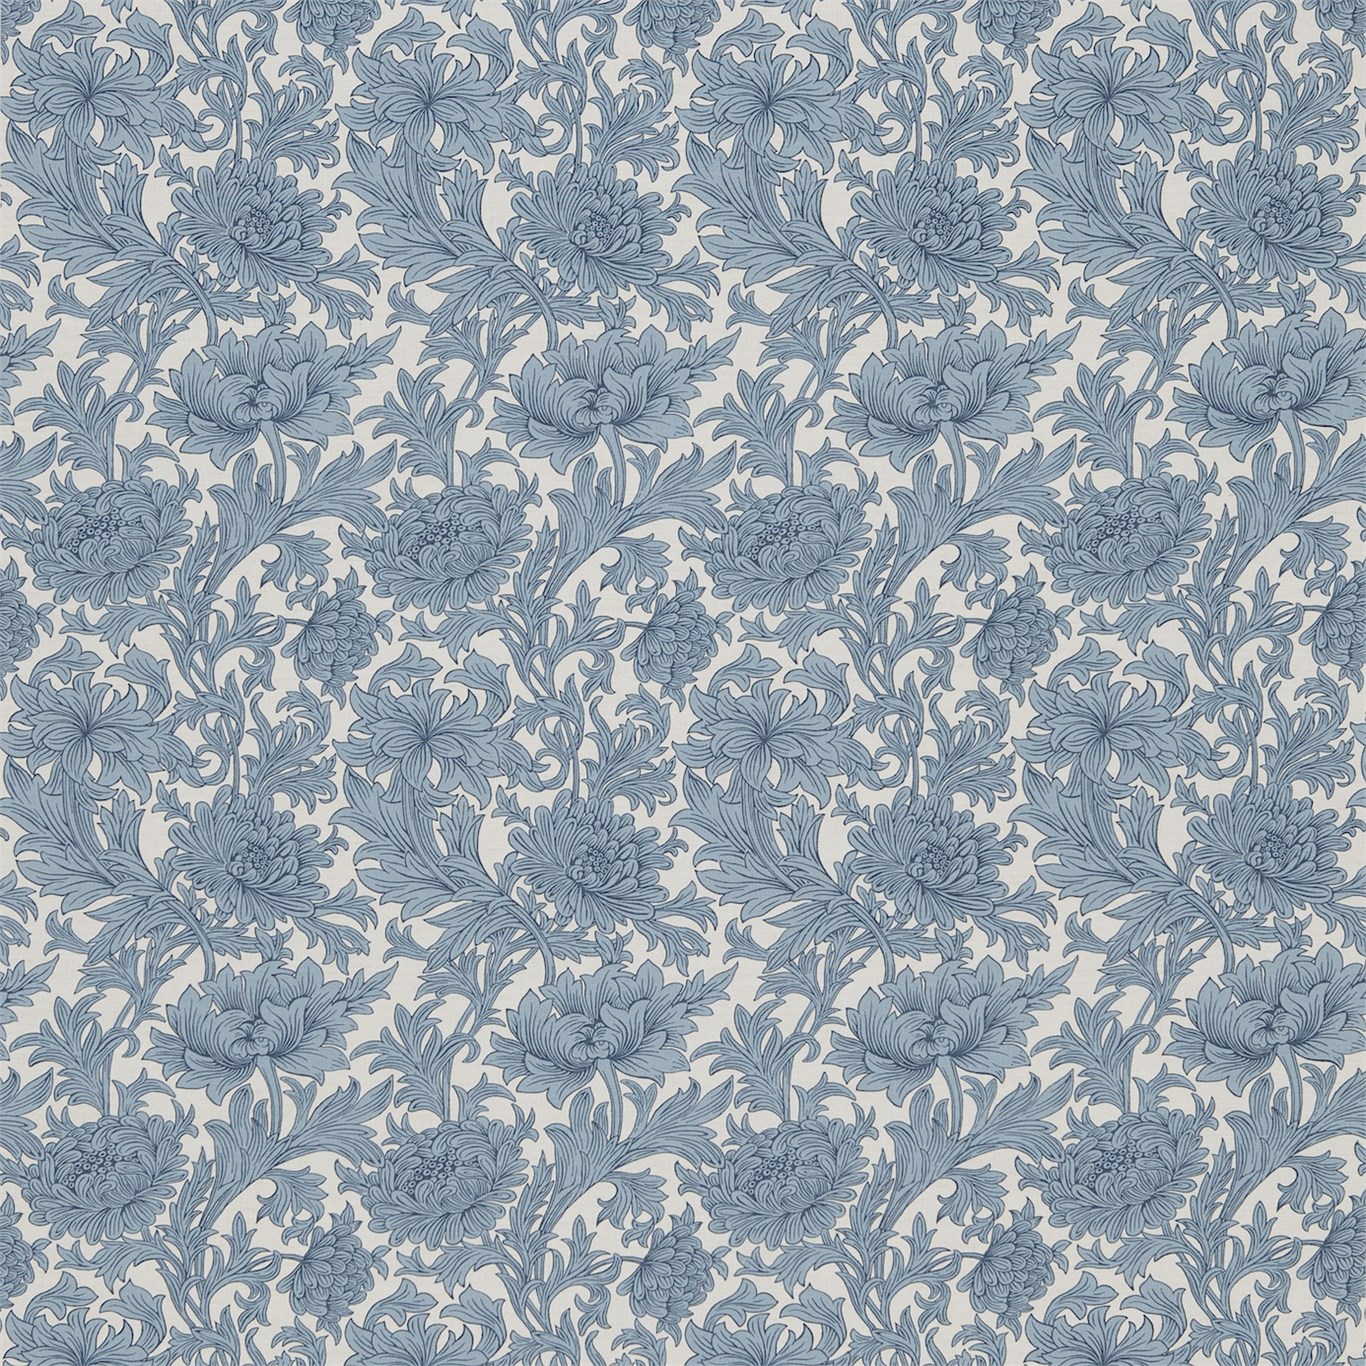 Chrysanthemum Toile Woad/Chalk Fabric by MOR